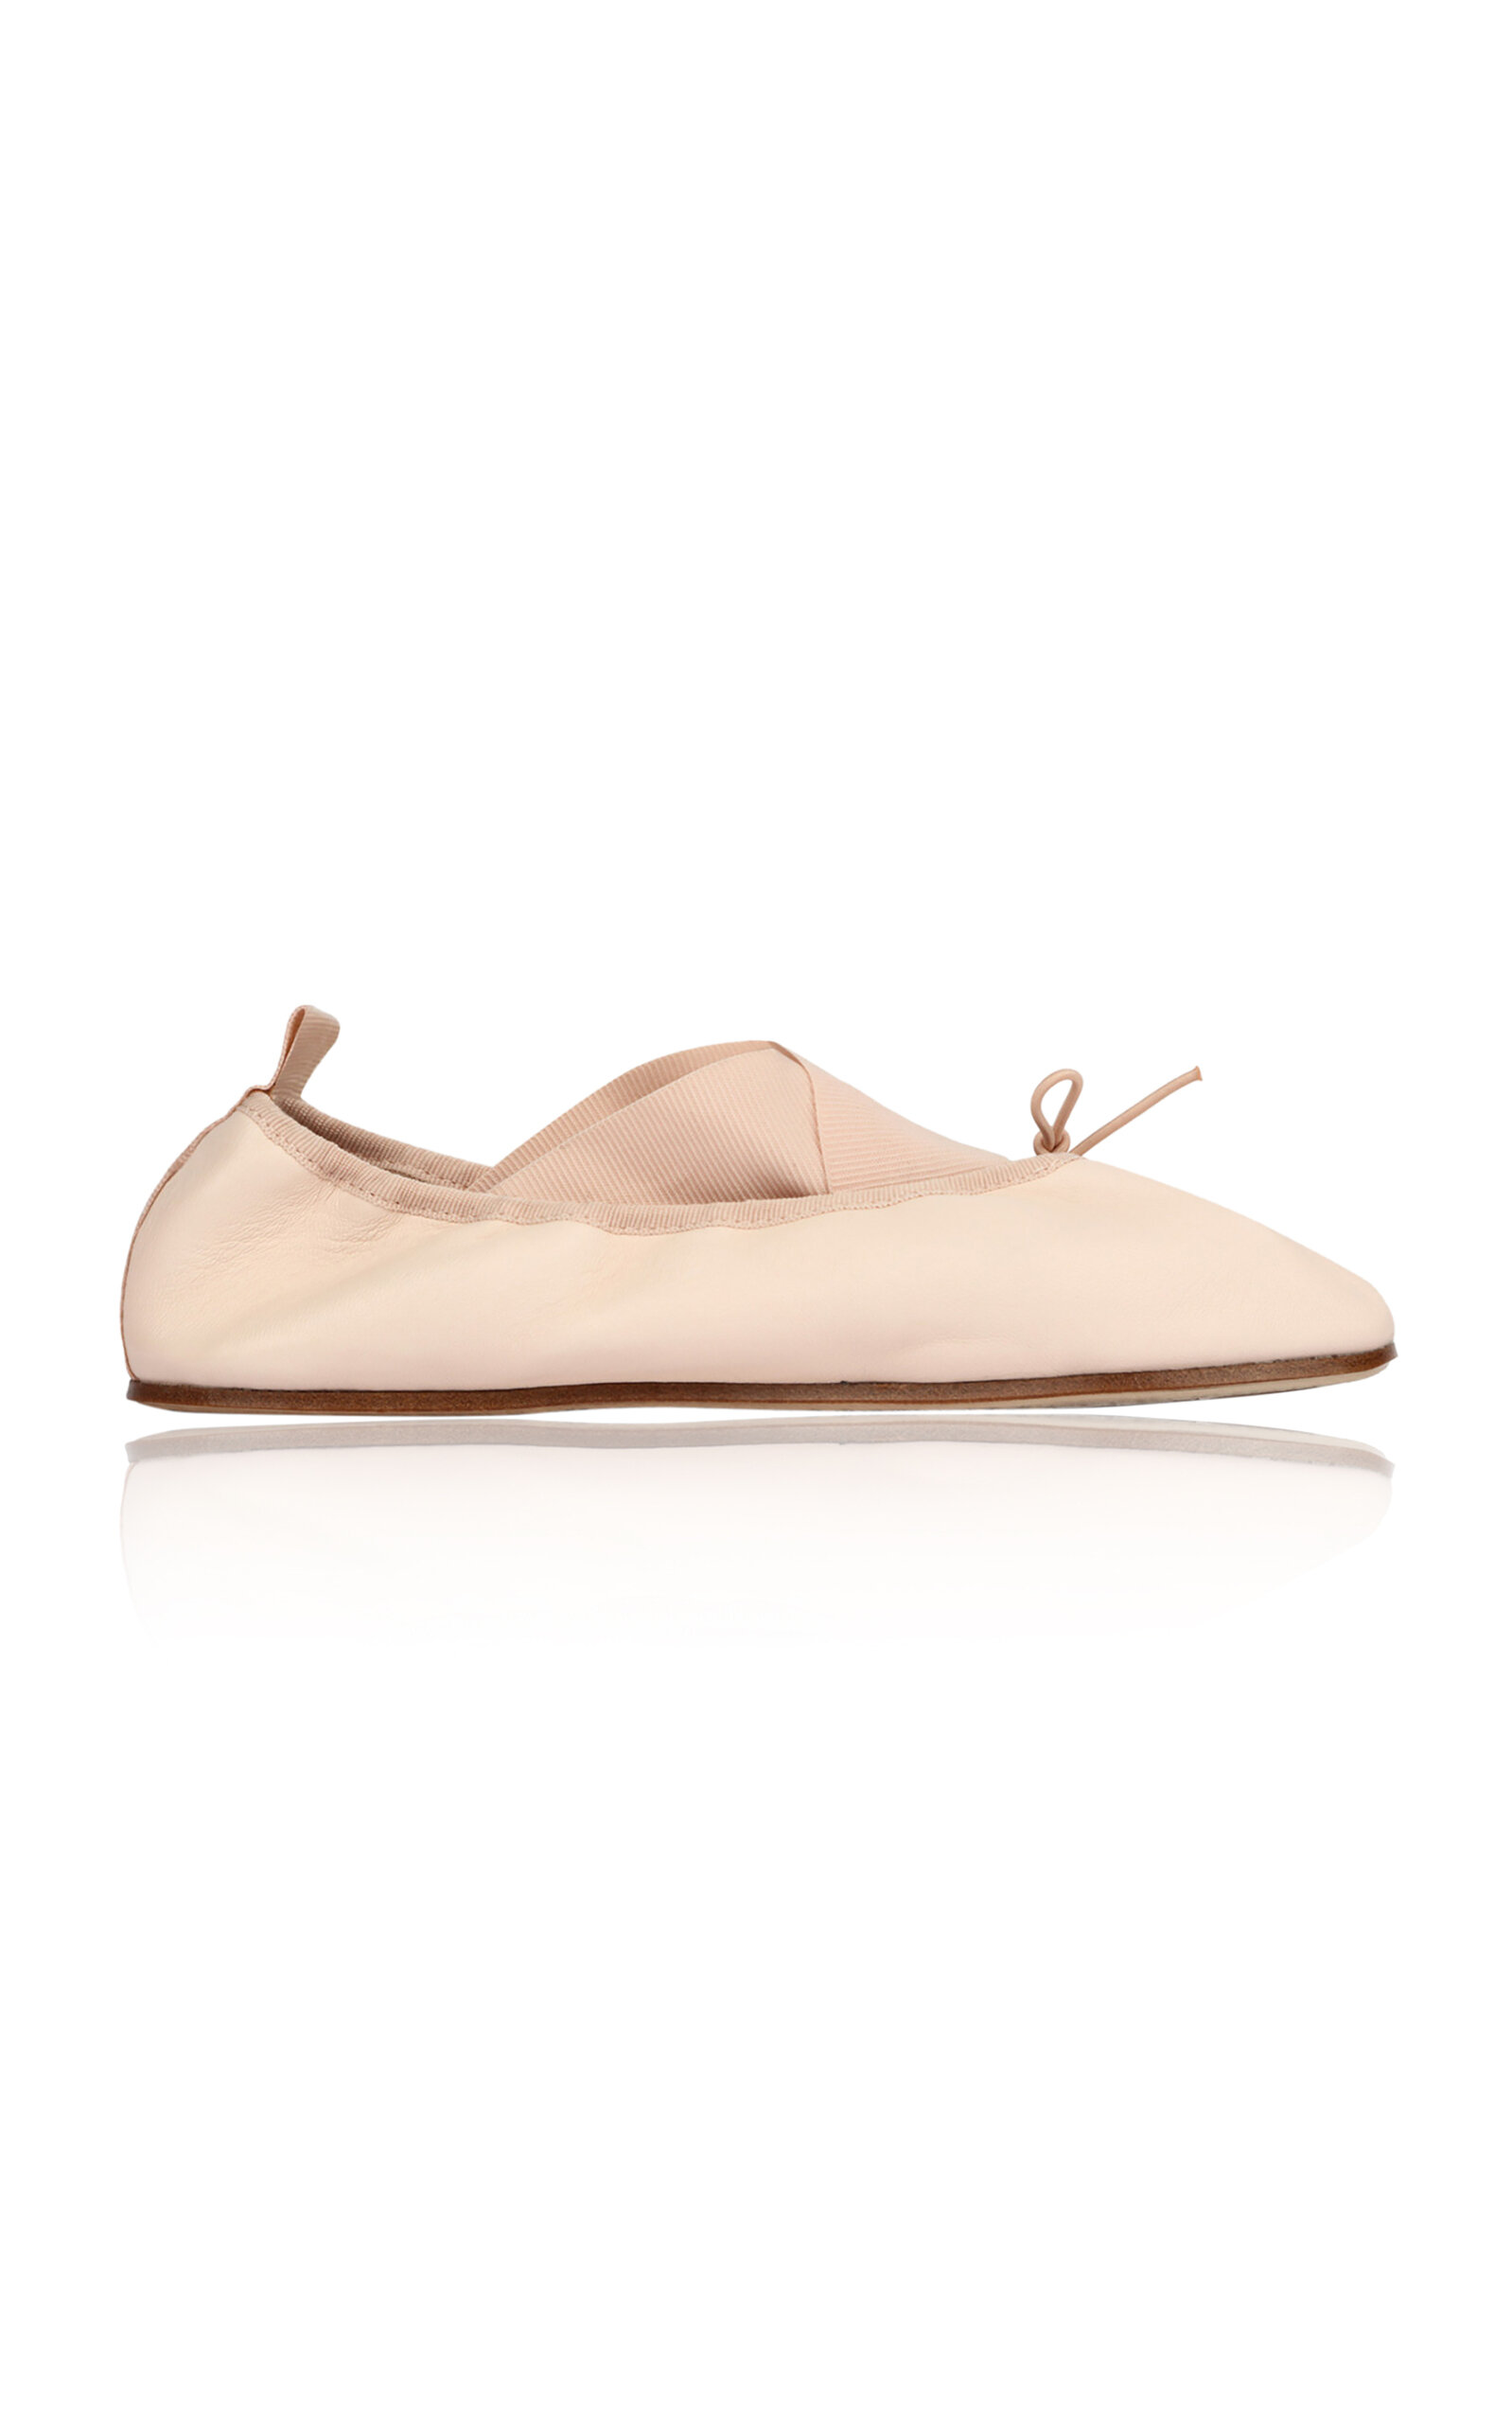 Repetto Gianna Leather Ballerina Flats In Pink